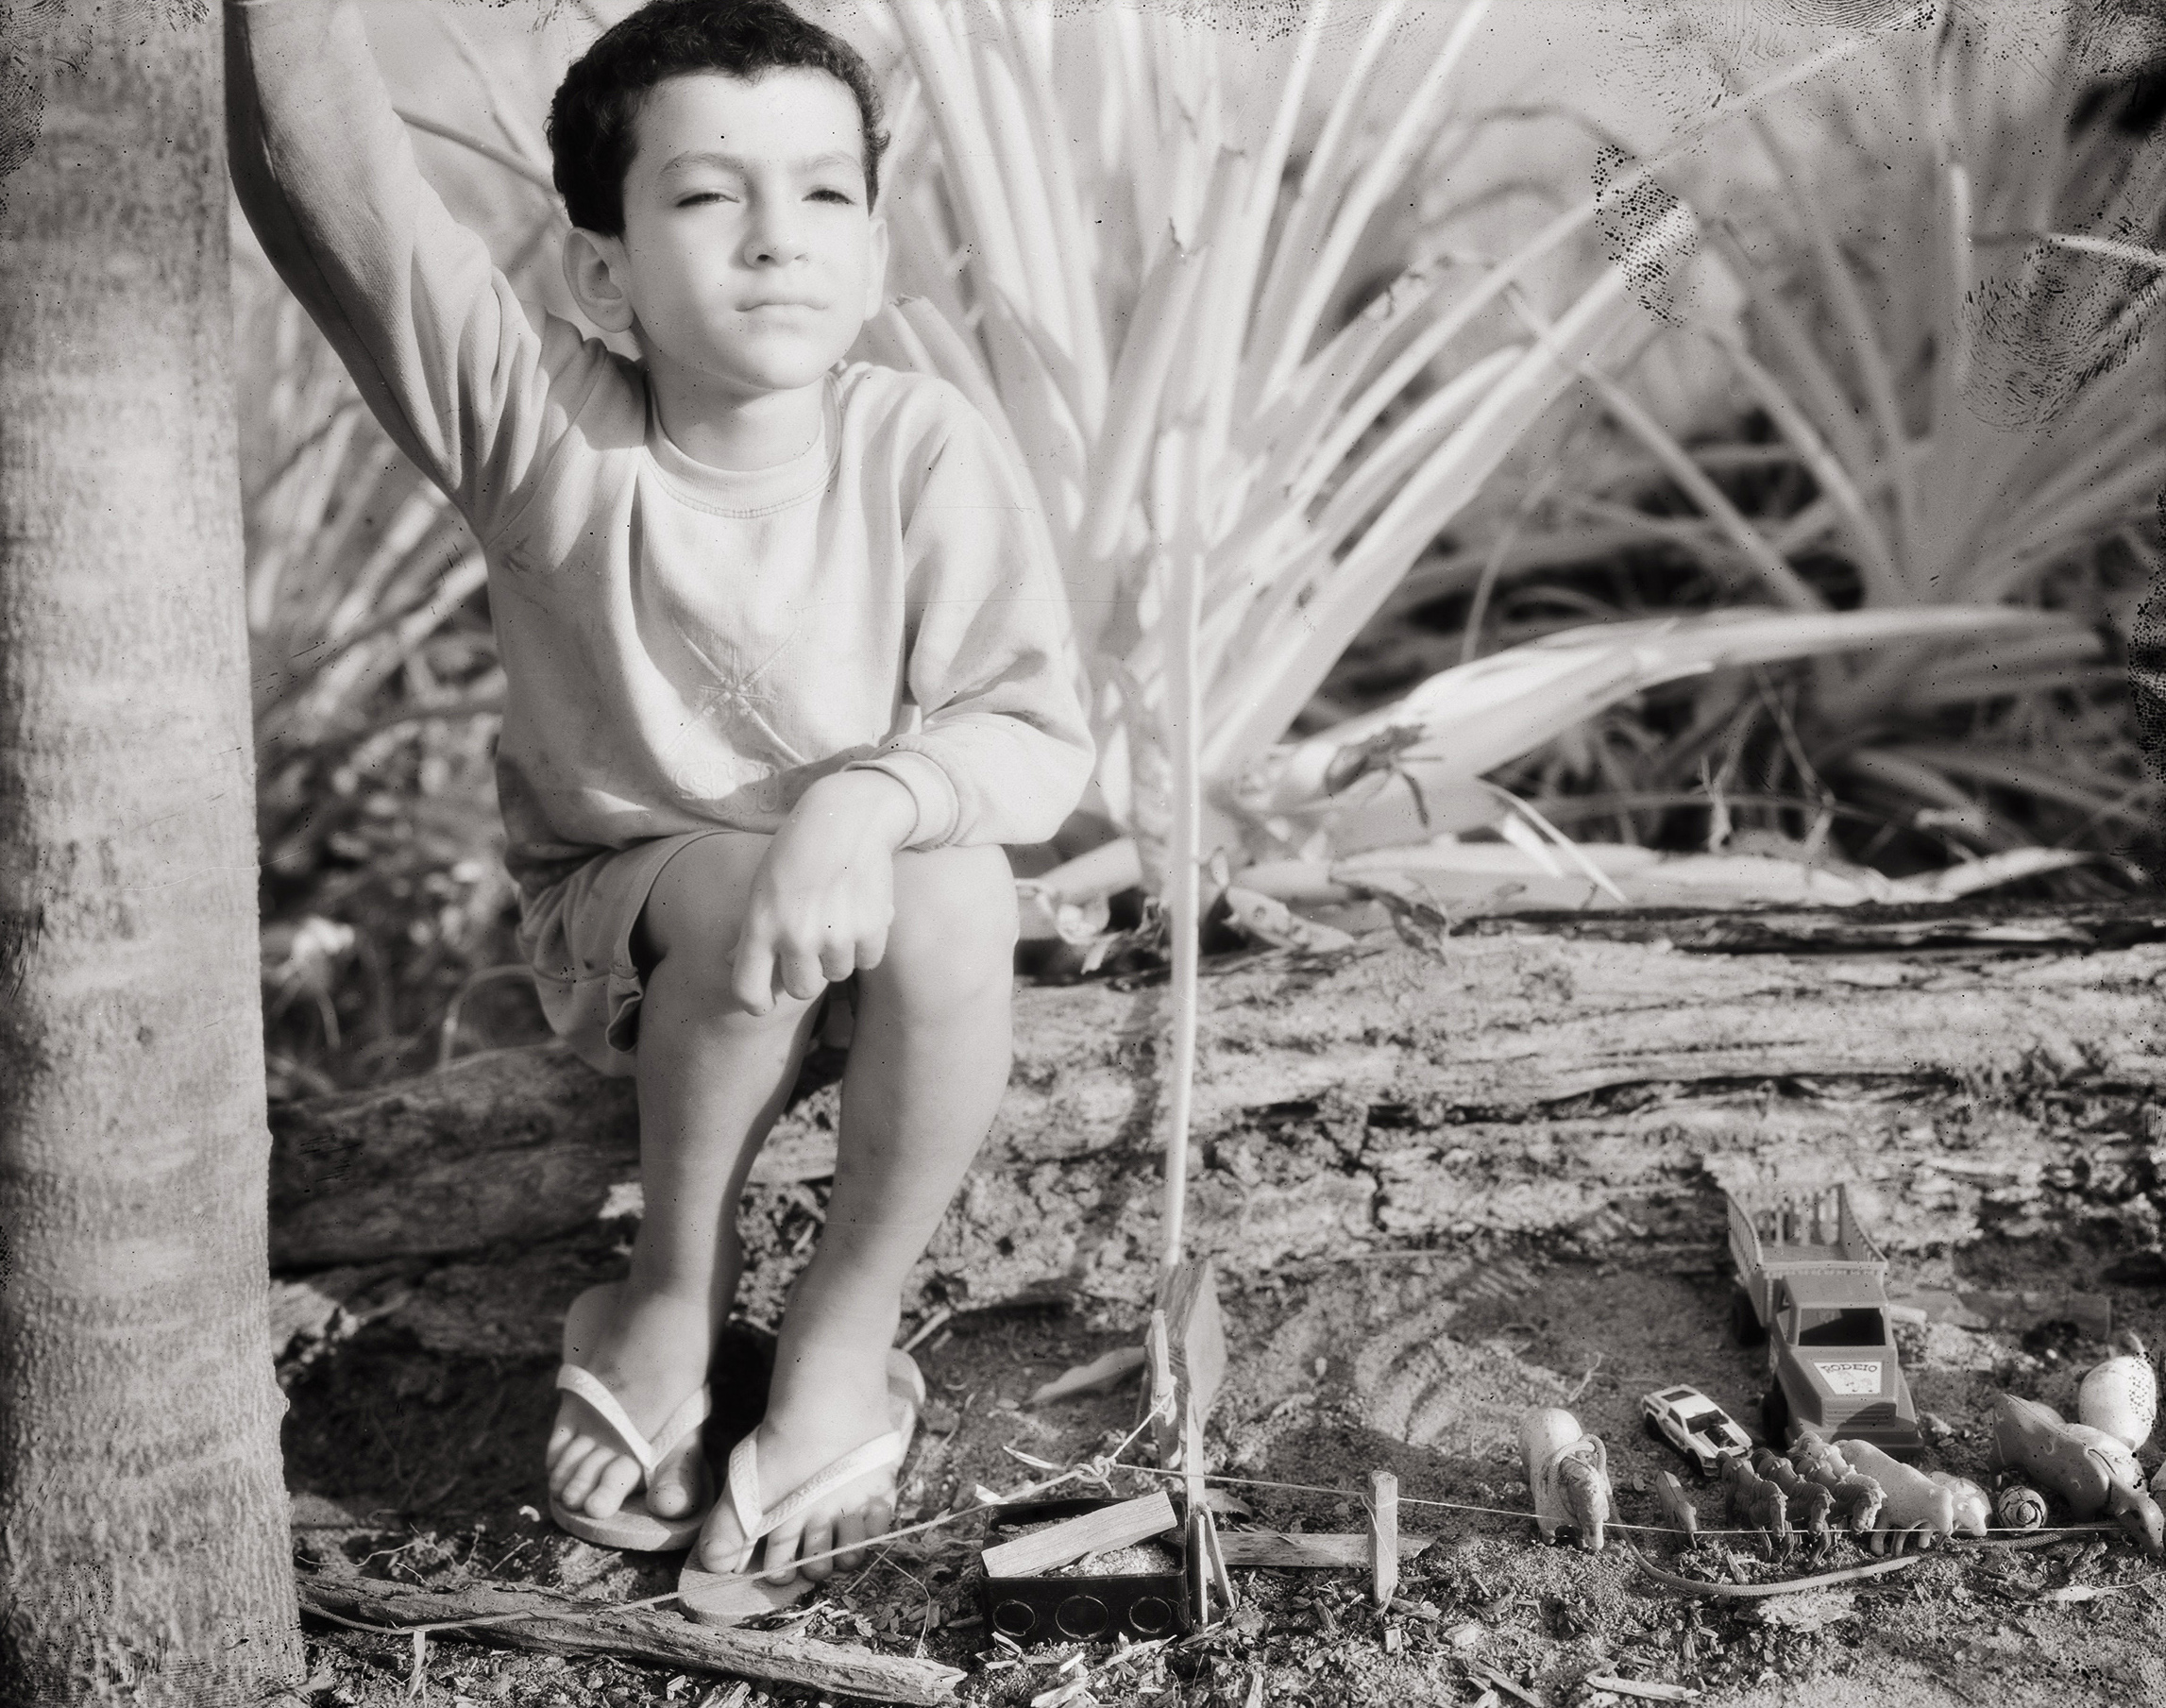 Black and white image of a small boy with dark hair wearing a white long-sleeved shirt and thongs squatting on log in bushland.